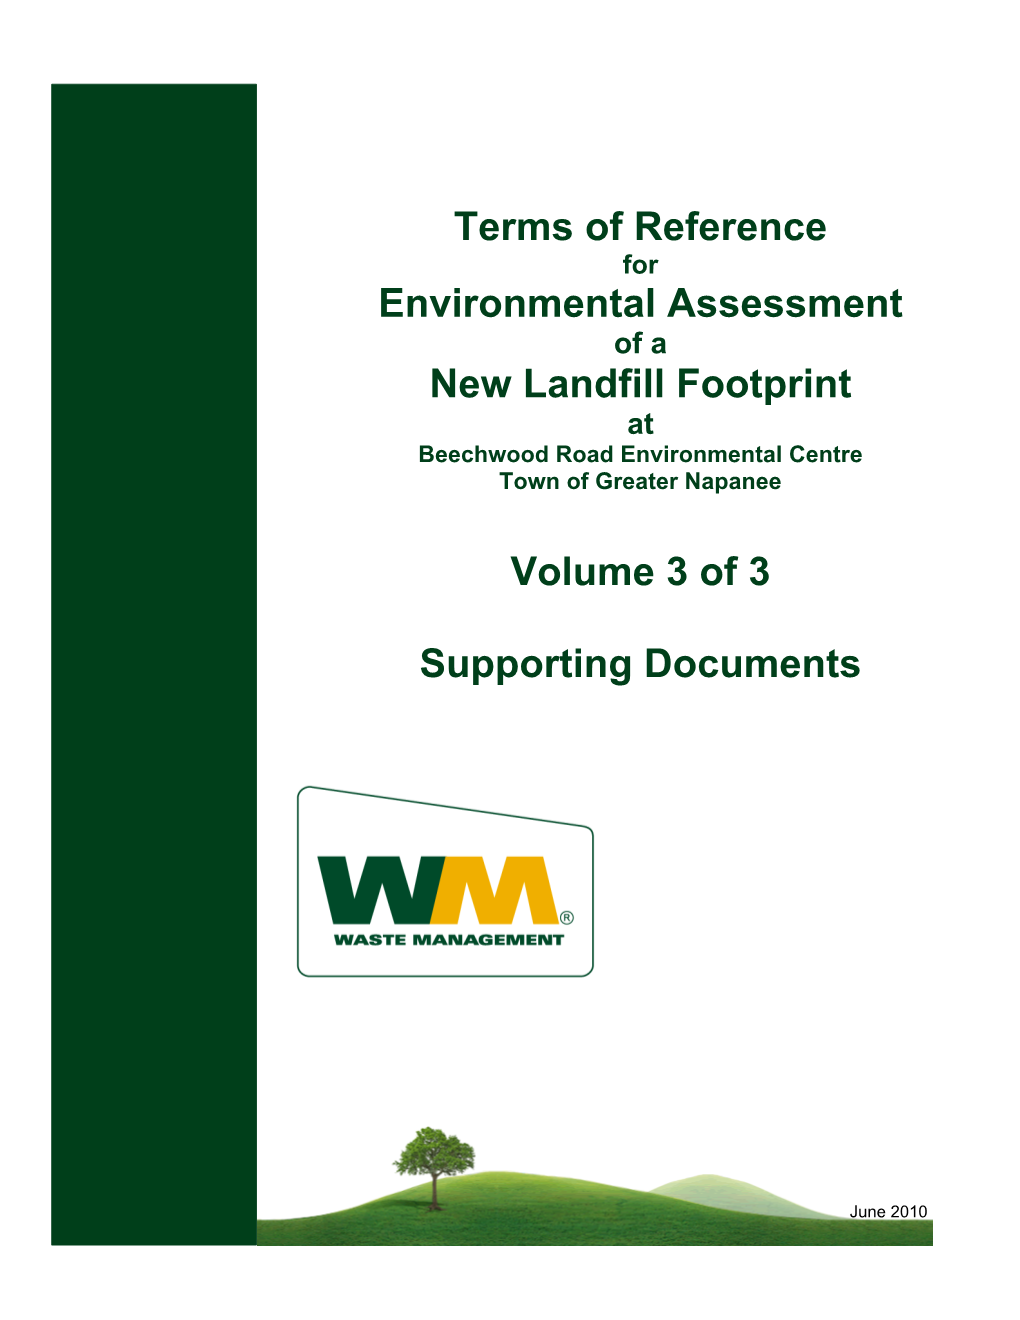 Terms of Reference Environmental Assessment New Landfill Footprint